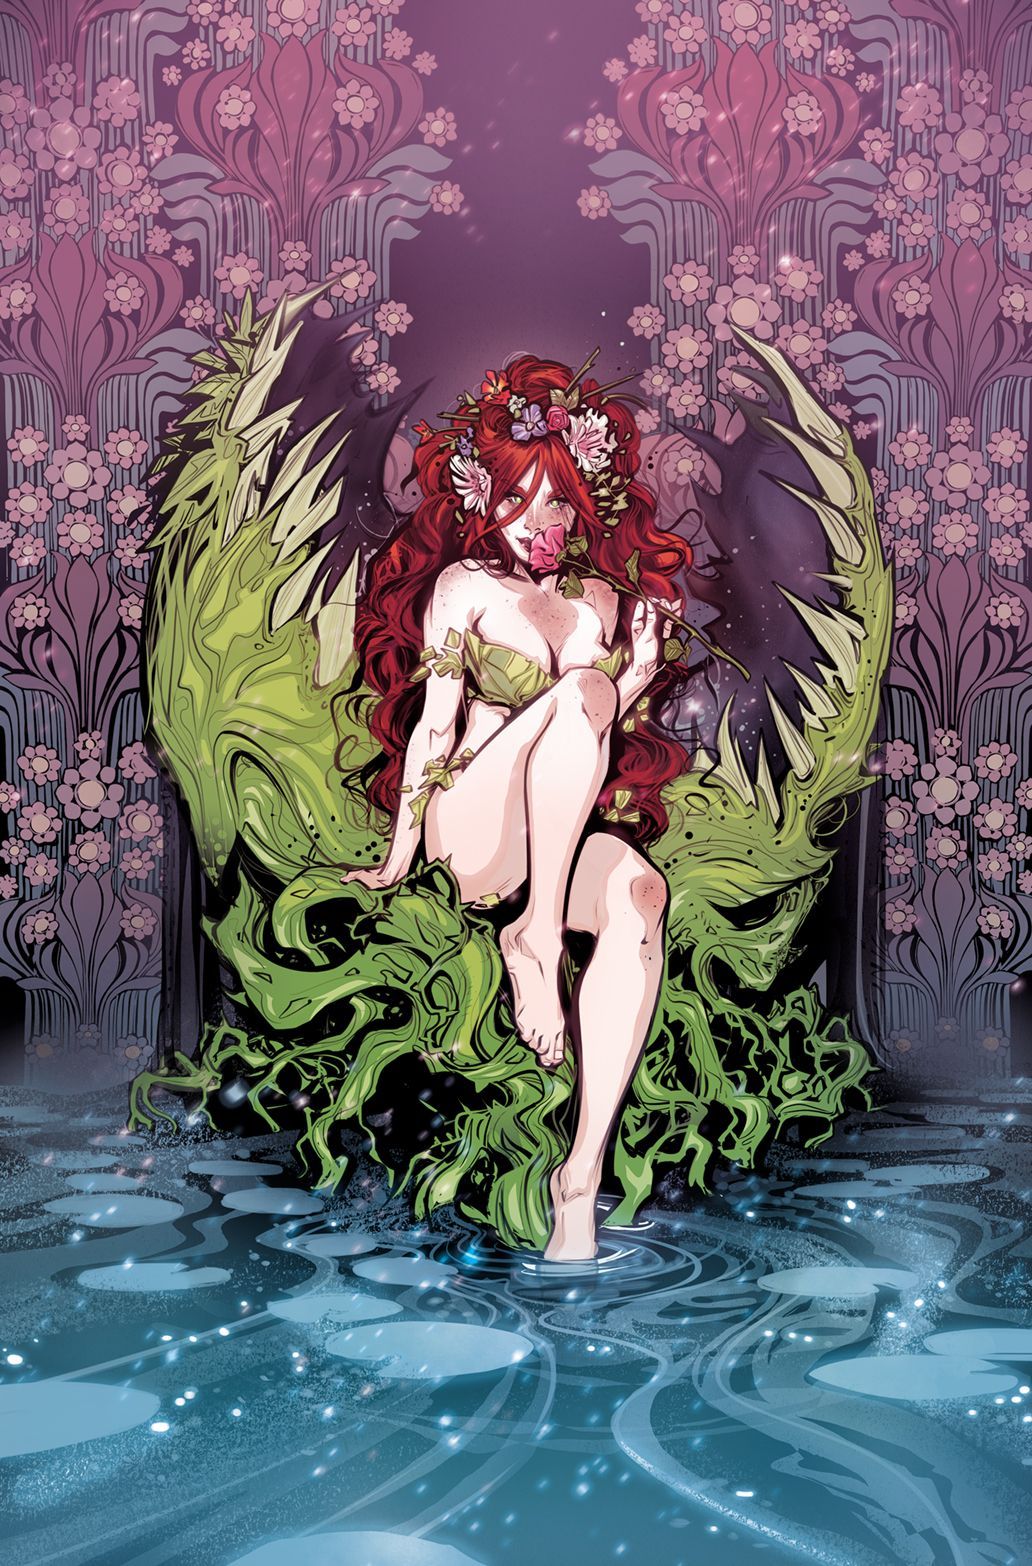 DC's Heroes and Villains Show Skin in Thirsty Swimsuit Variant Covers